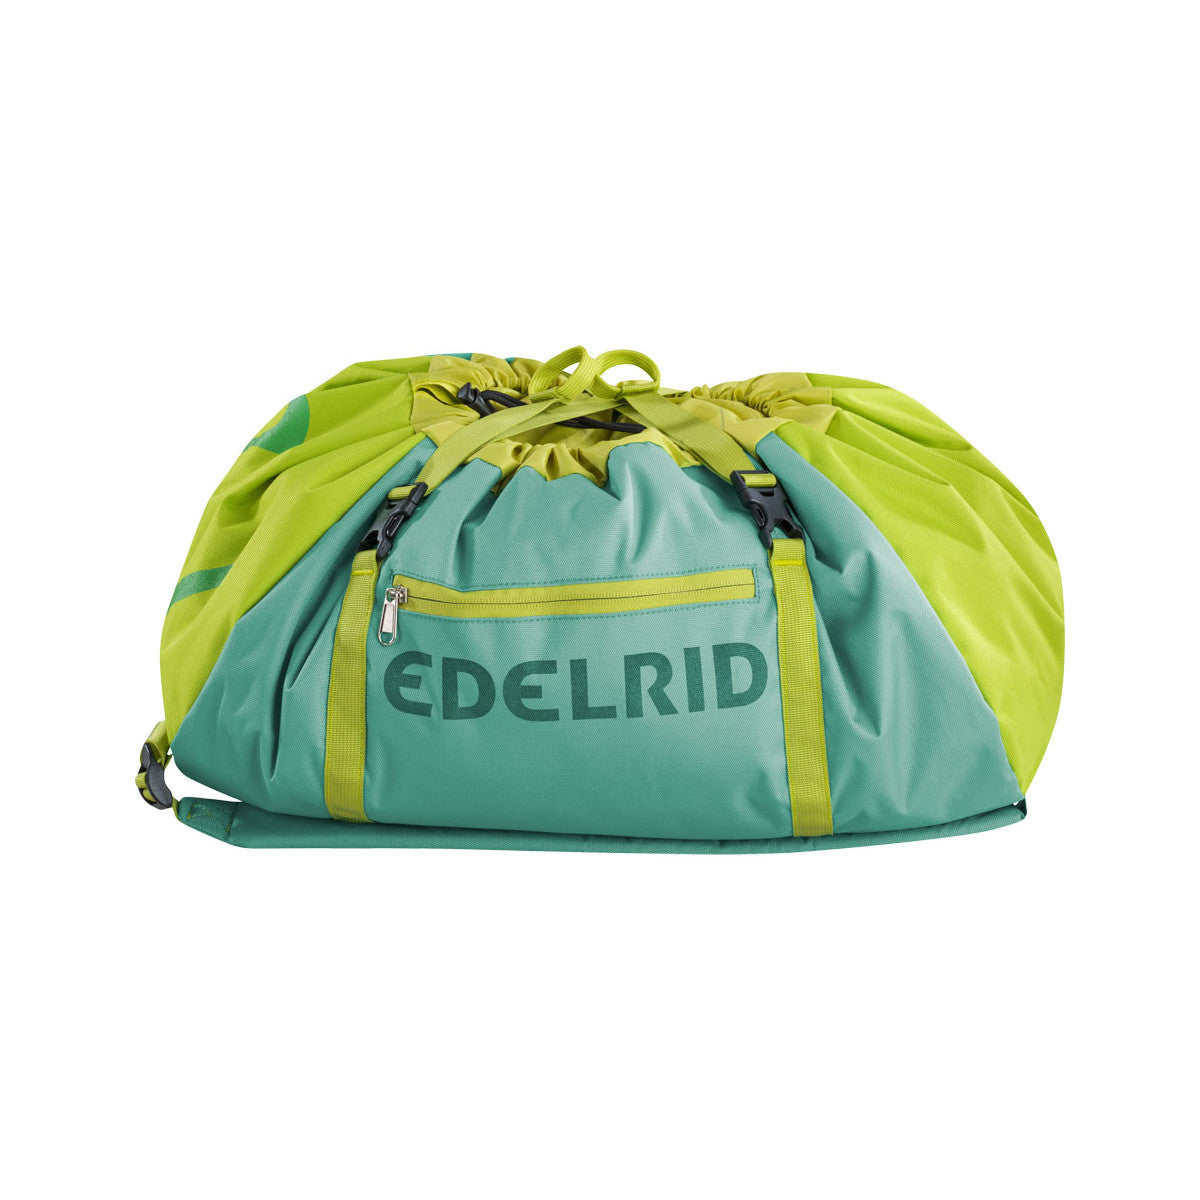 Edelrid Drone II climbing Rope Bag, shown closed in green and yellow colours